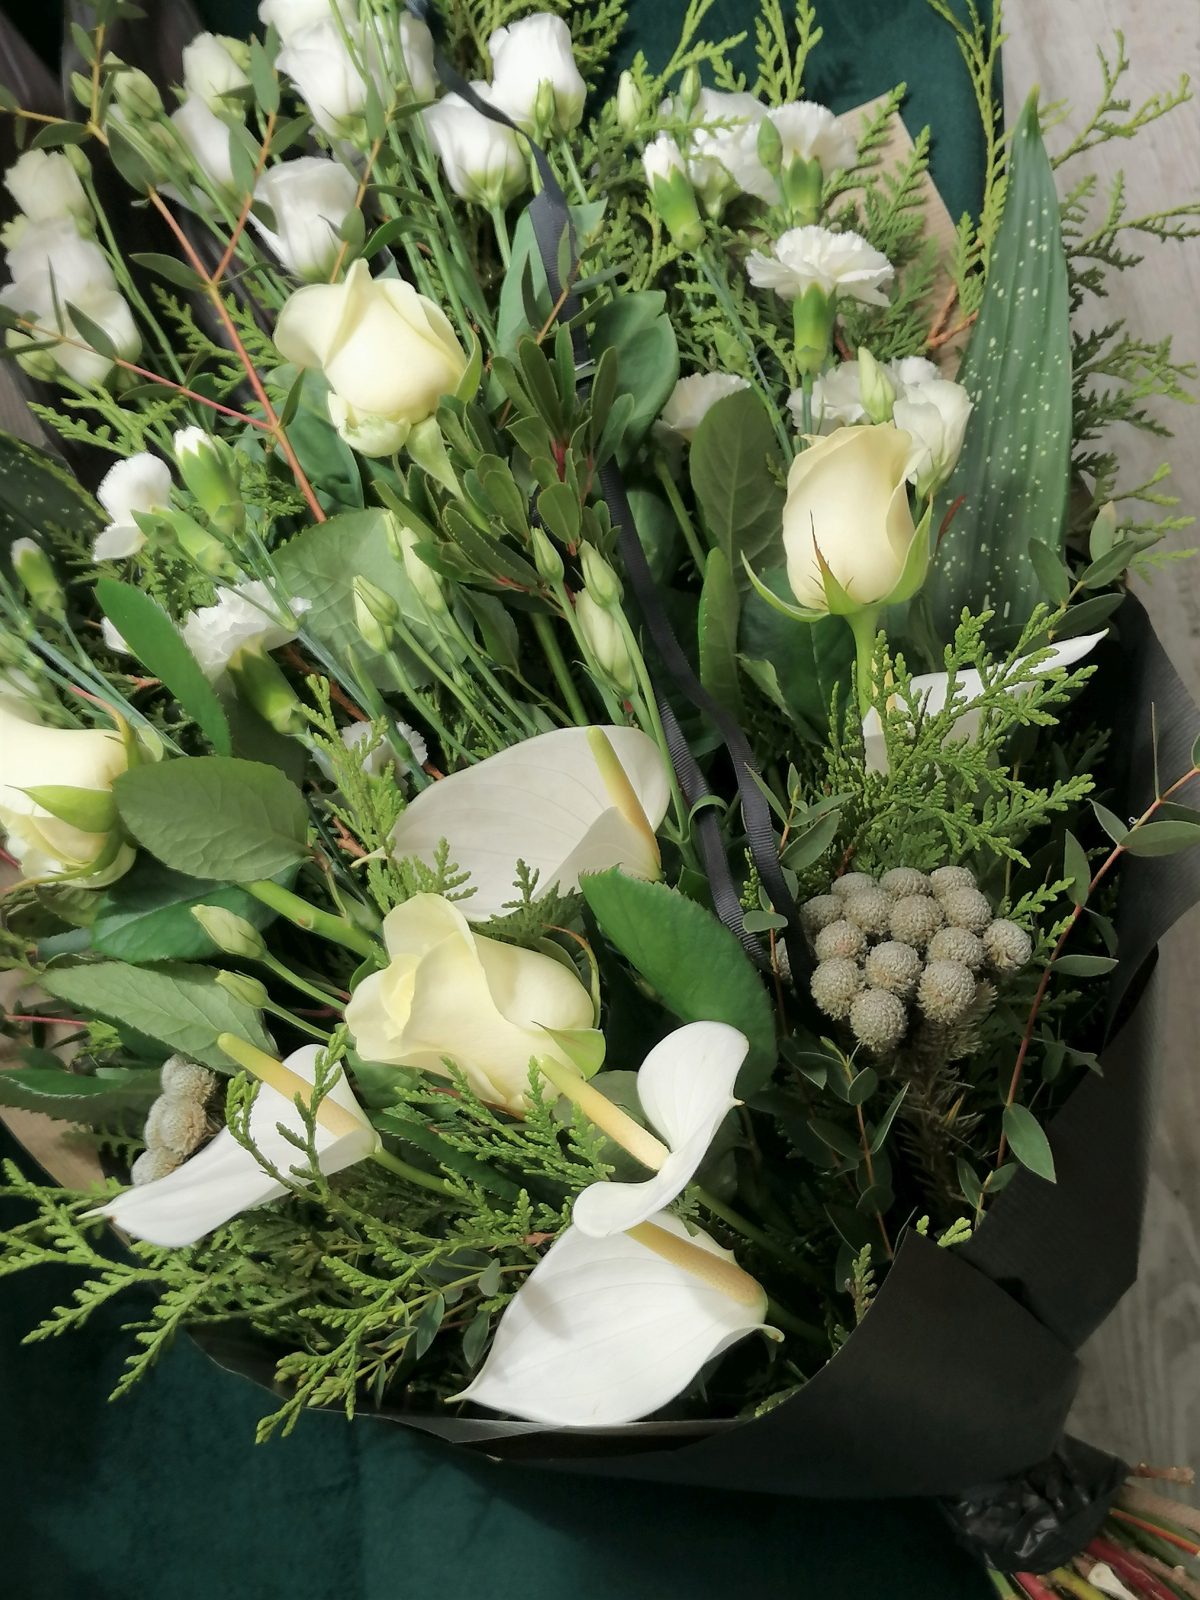 Multispecies using: eustoma, carnations, roses, anthurium, brunia. Flowers arranged in the form of a bouquet to be assembled, in a light and handy form